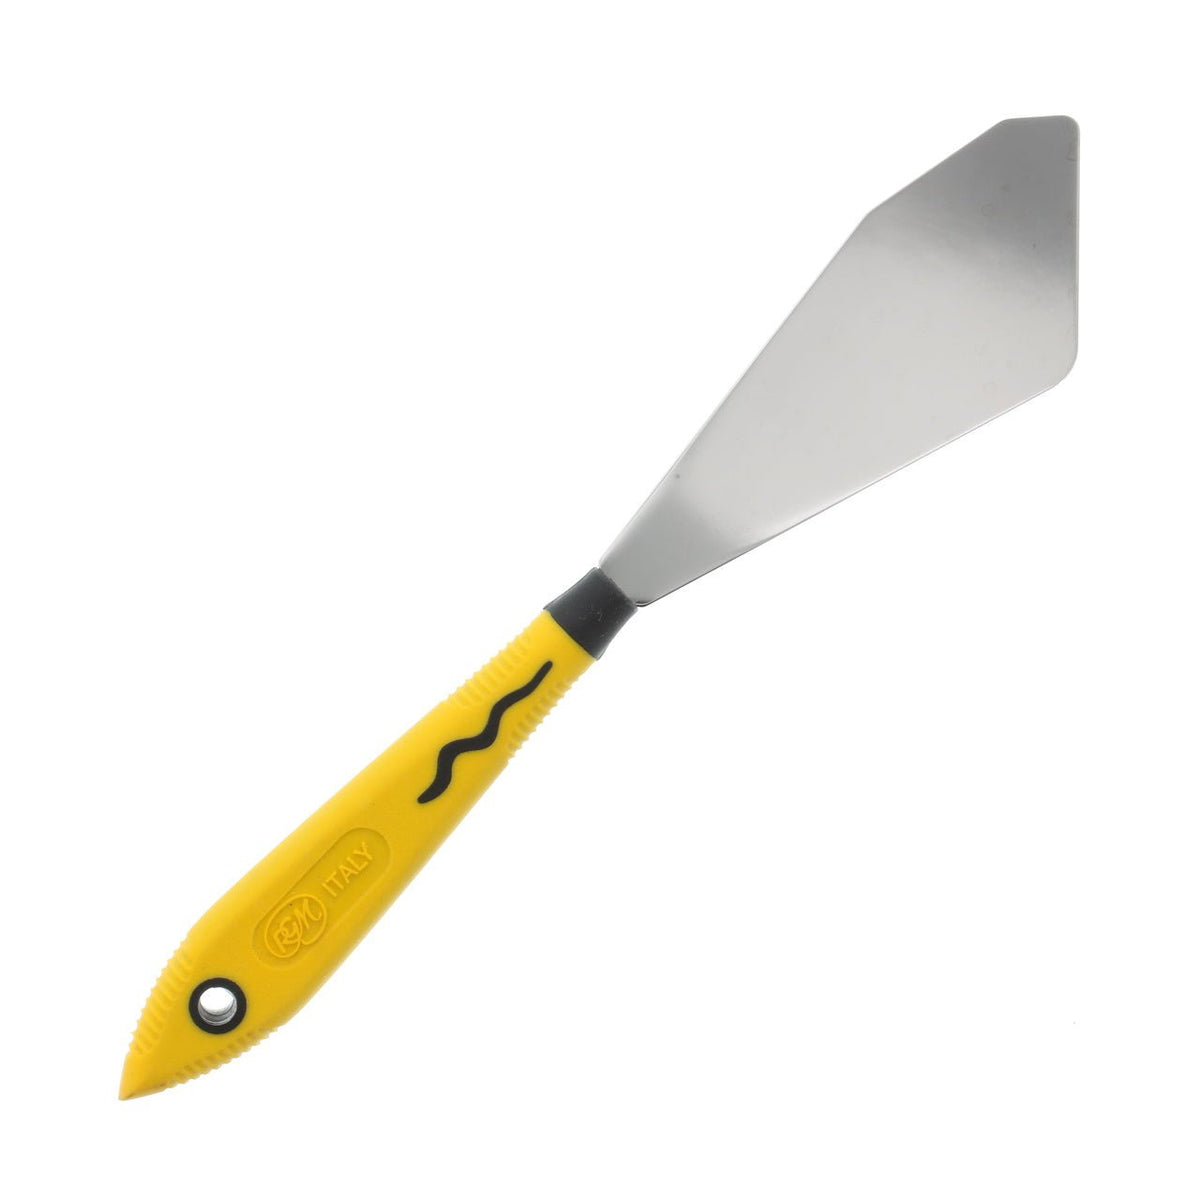 RGM Soft Grip Painting Knife #106 (Yellow Handle) - merriartist.com